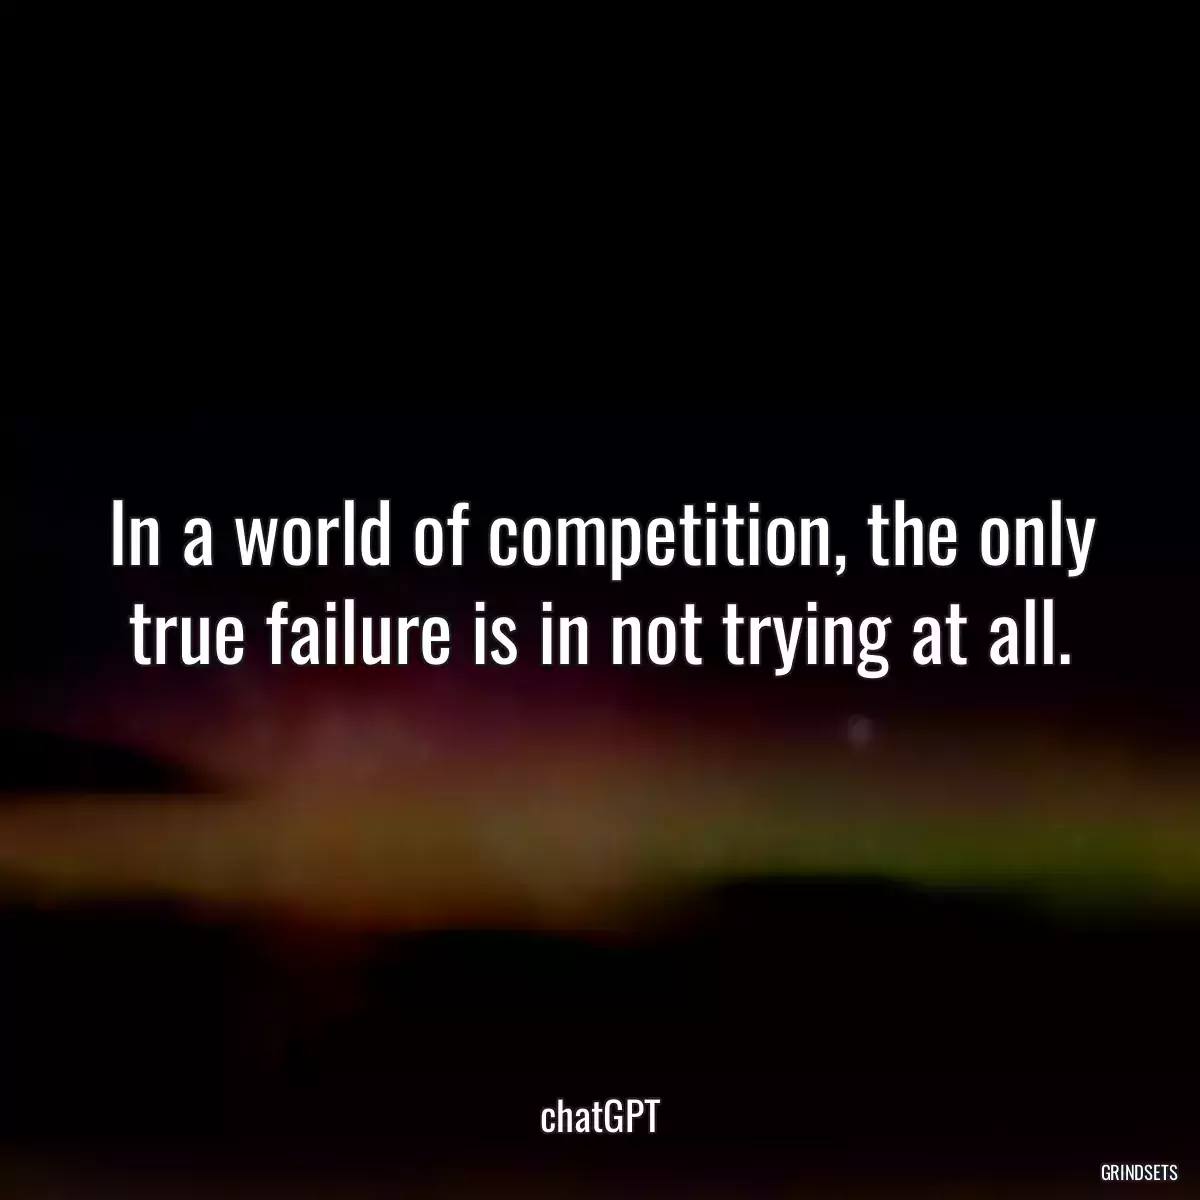 In a world of competition, the only true failure is in not trying at all.